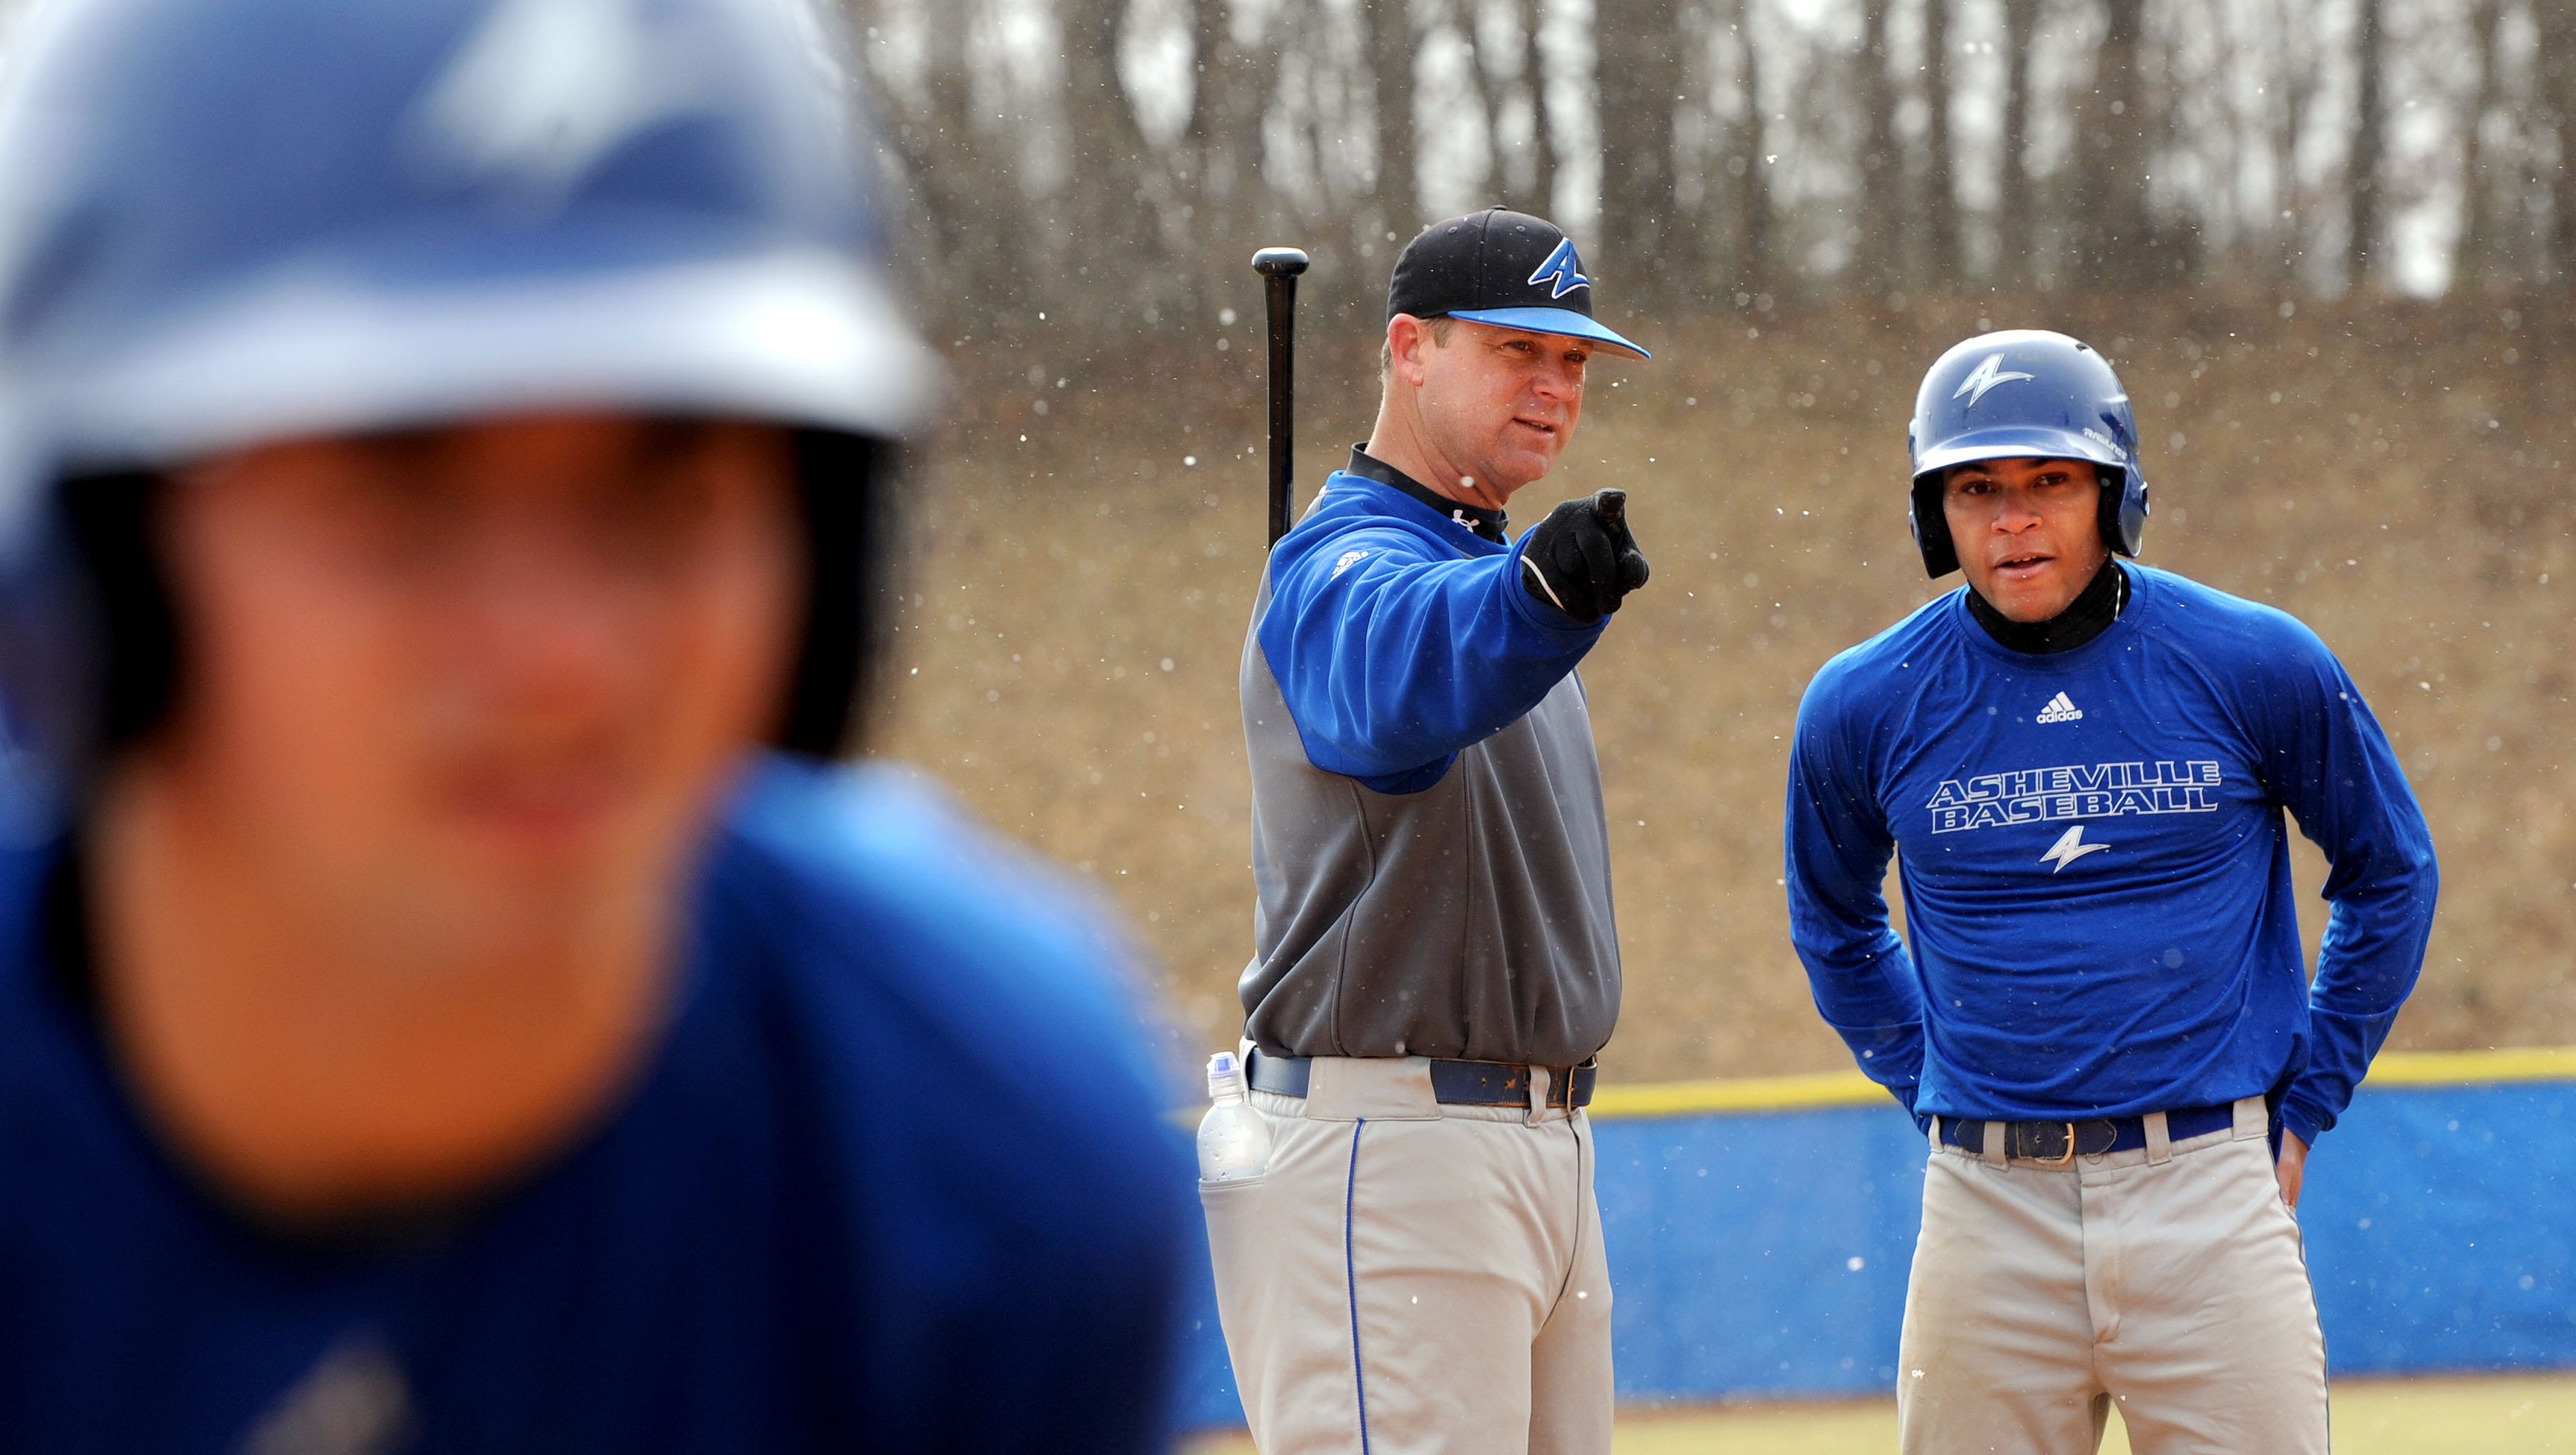 UNC Asheville baseball coach offering private lessons